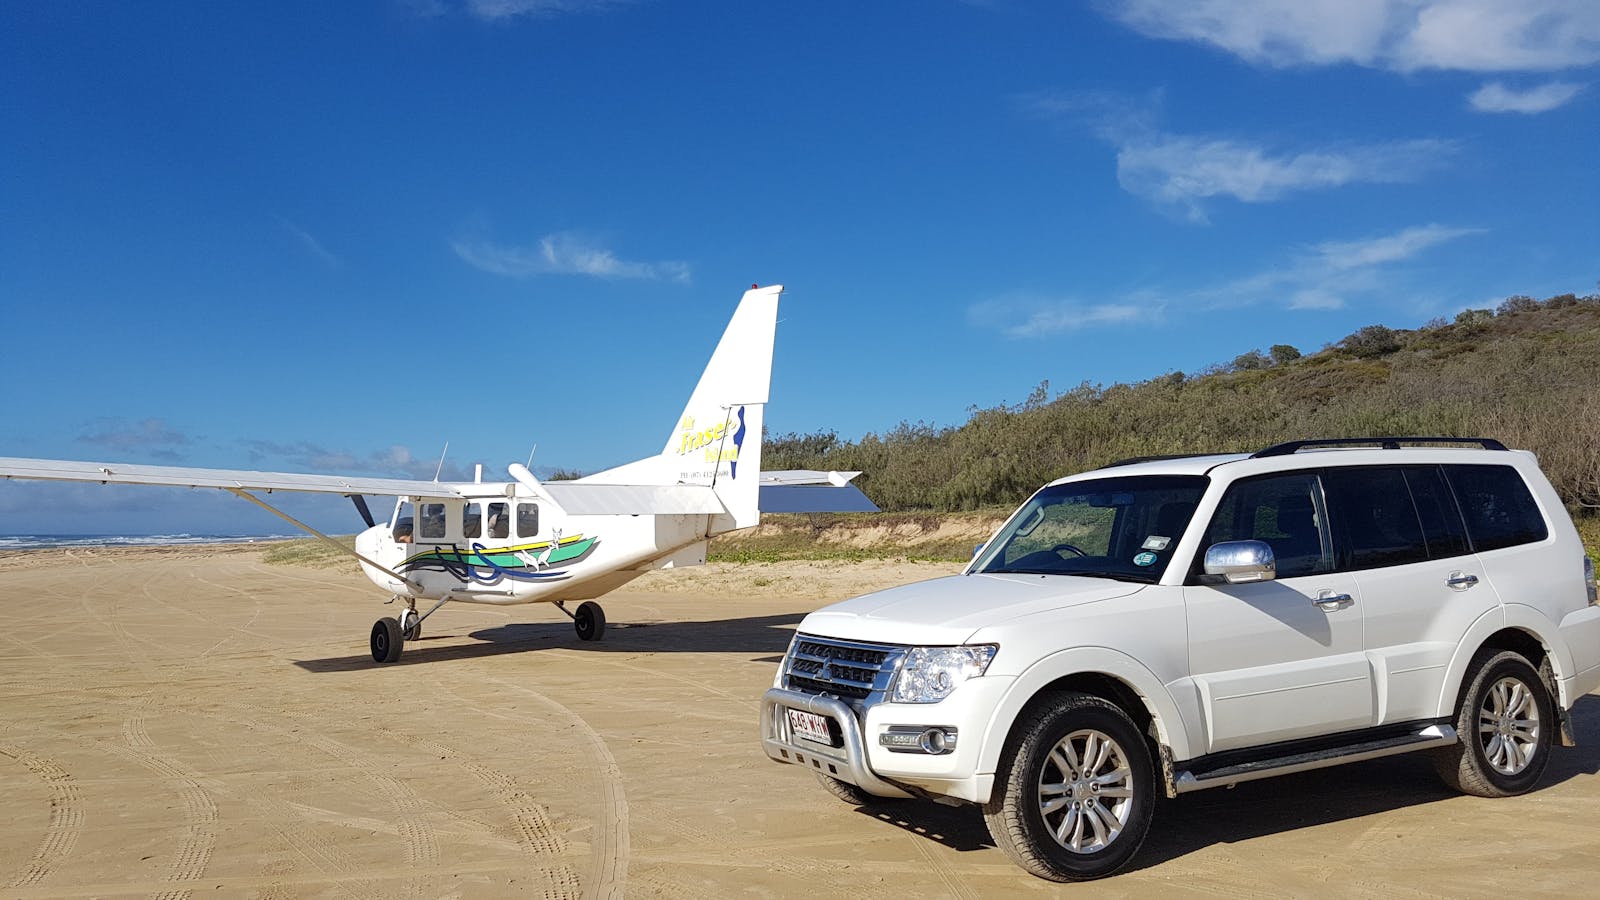 Land on Fraser Island and collect your 4wd hire vehicle.